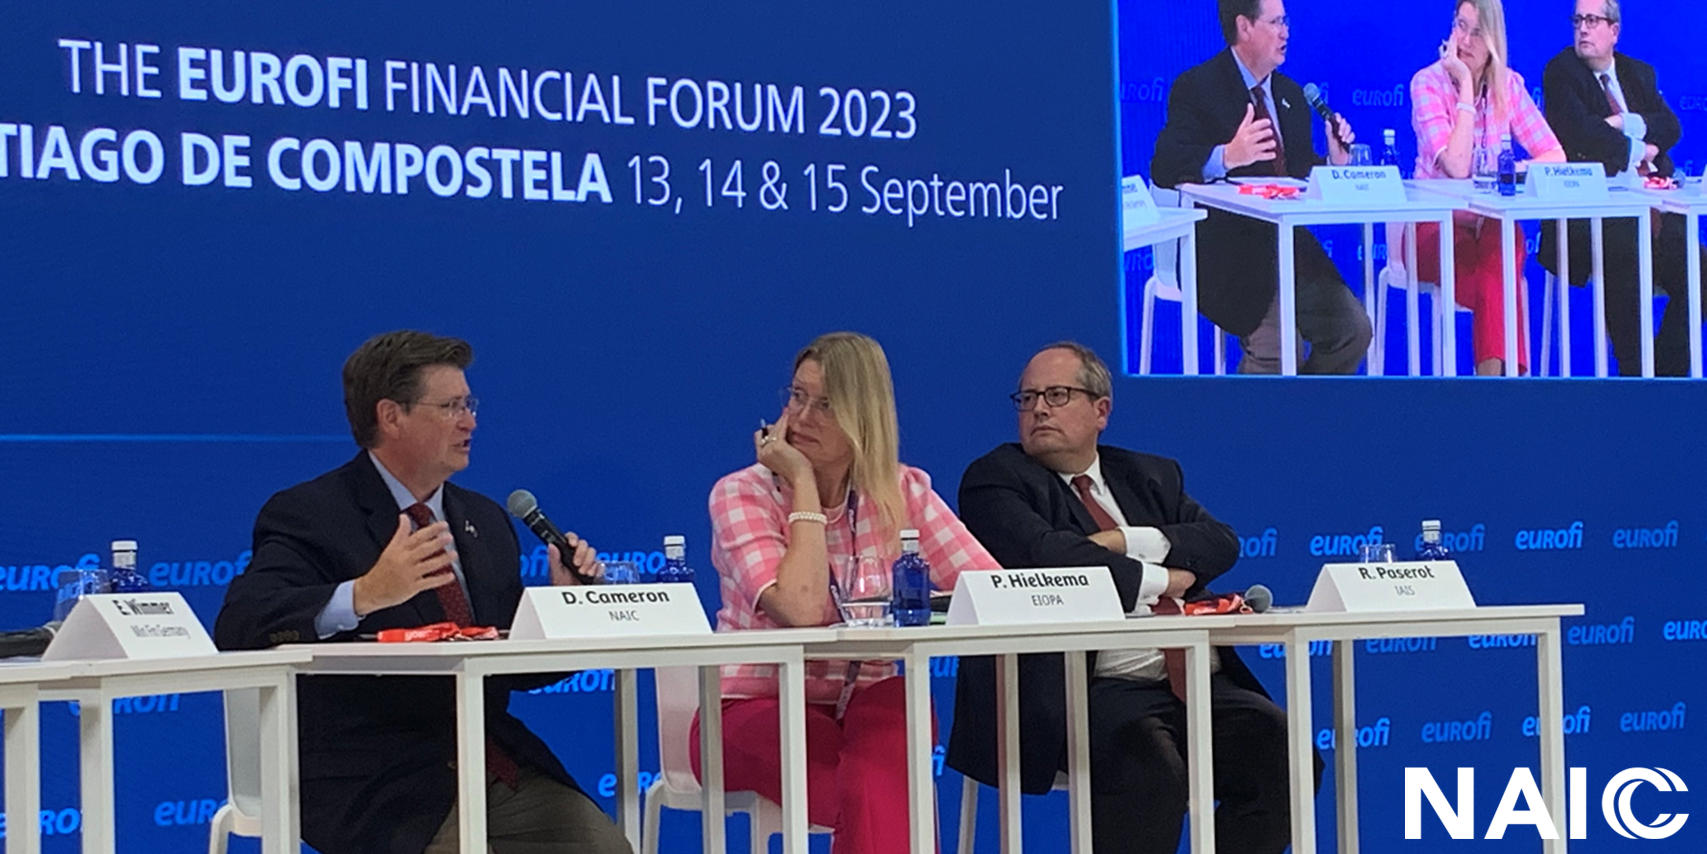 National Association of Insurance Commissioners (NAIC) Immediate Past President and Idaho Department of Insurance Director Dean L. Cameron Speaks On a Panel at the Eurofi Financial Forum in Santiago de Compostela, Spain, in September 2023.